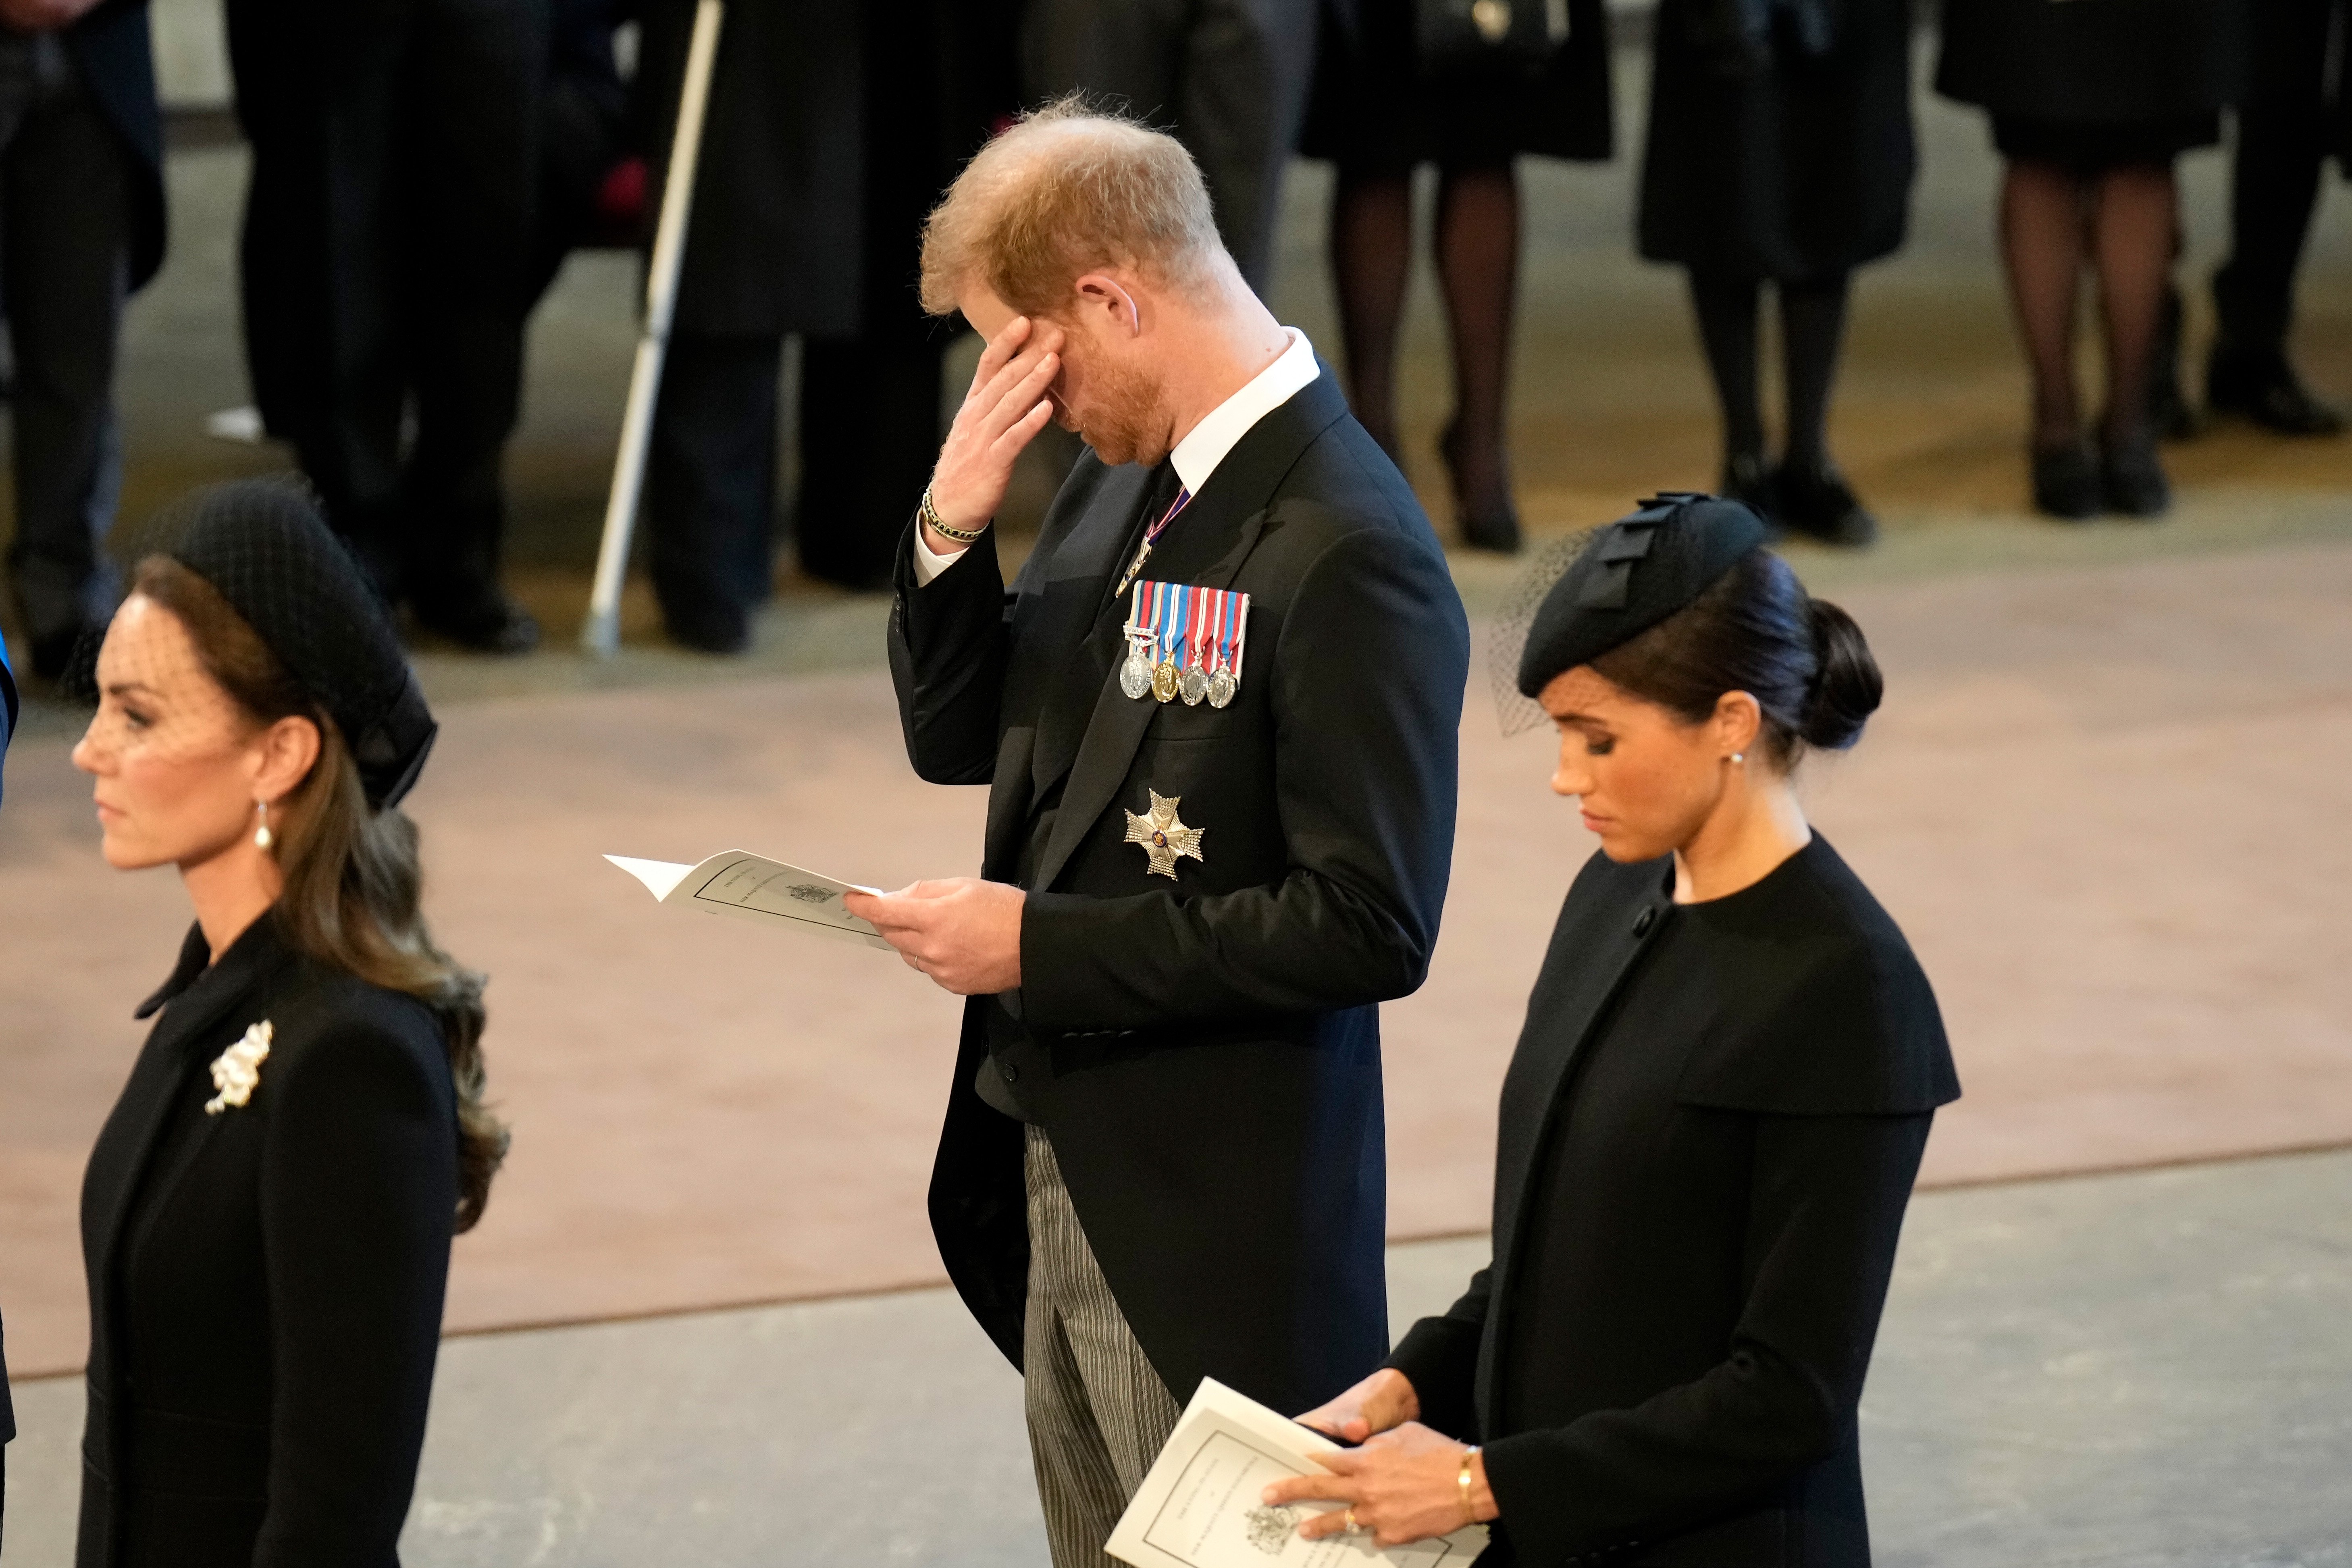 Catherine, Princess of Wales, Prince Harry, Duke of Sussex, and Meghan, Duchess of Sussex pay their respects in The Palace of Westminster after the procession for the Lying-in State of Queen Elizabeth II on September 14, 2022, in London, England. | Source: Getty Images